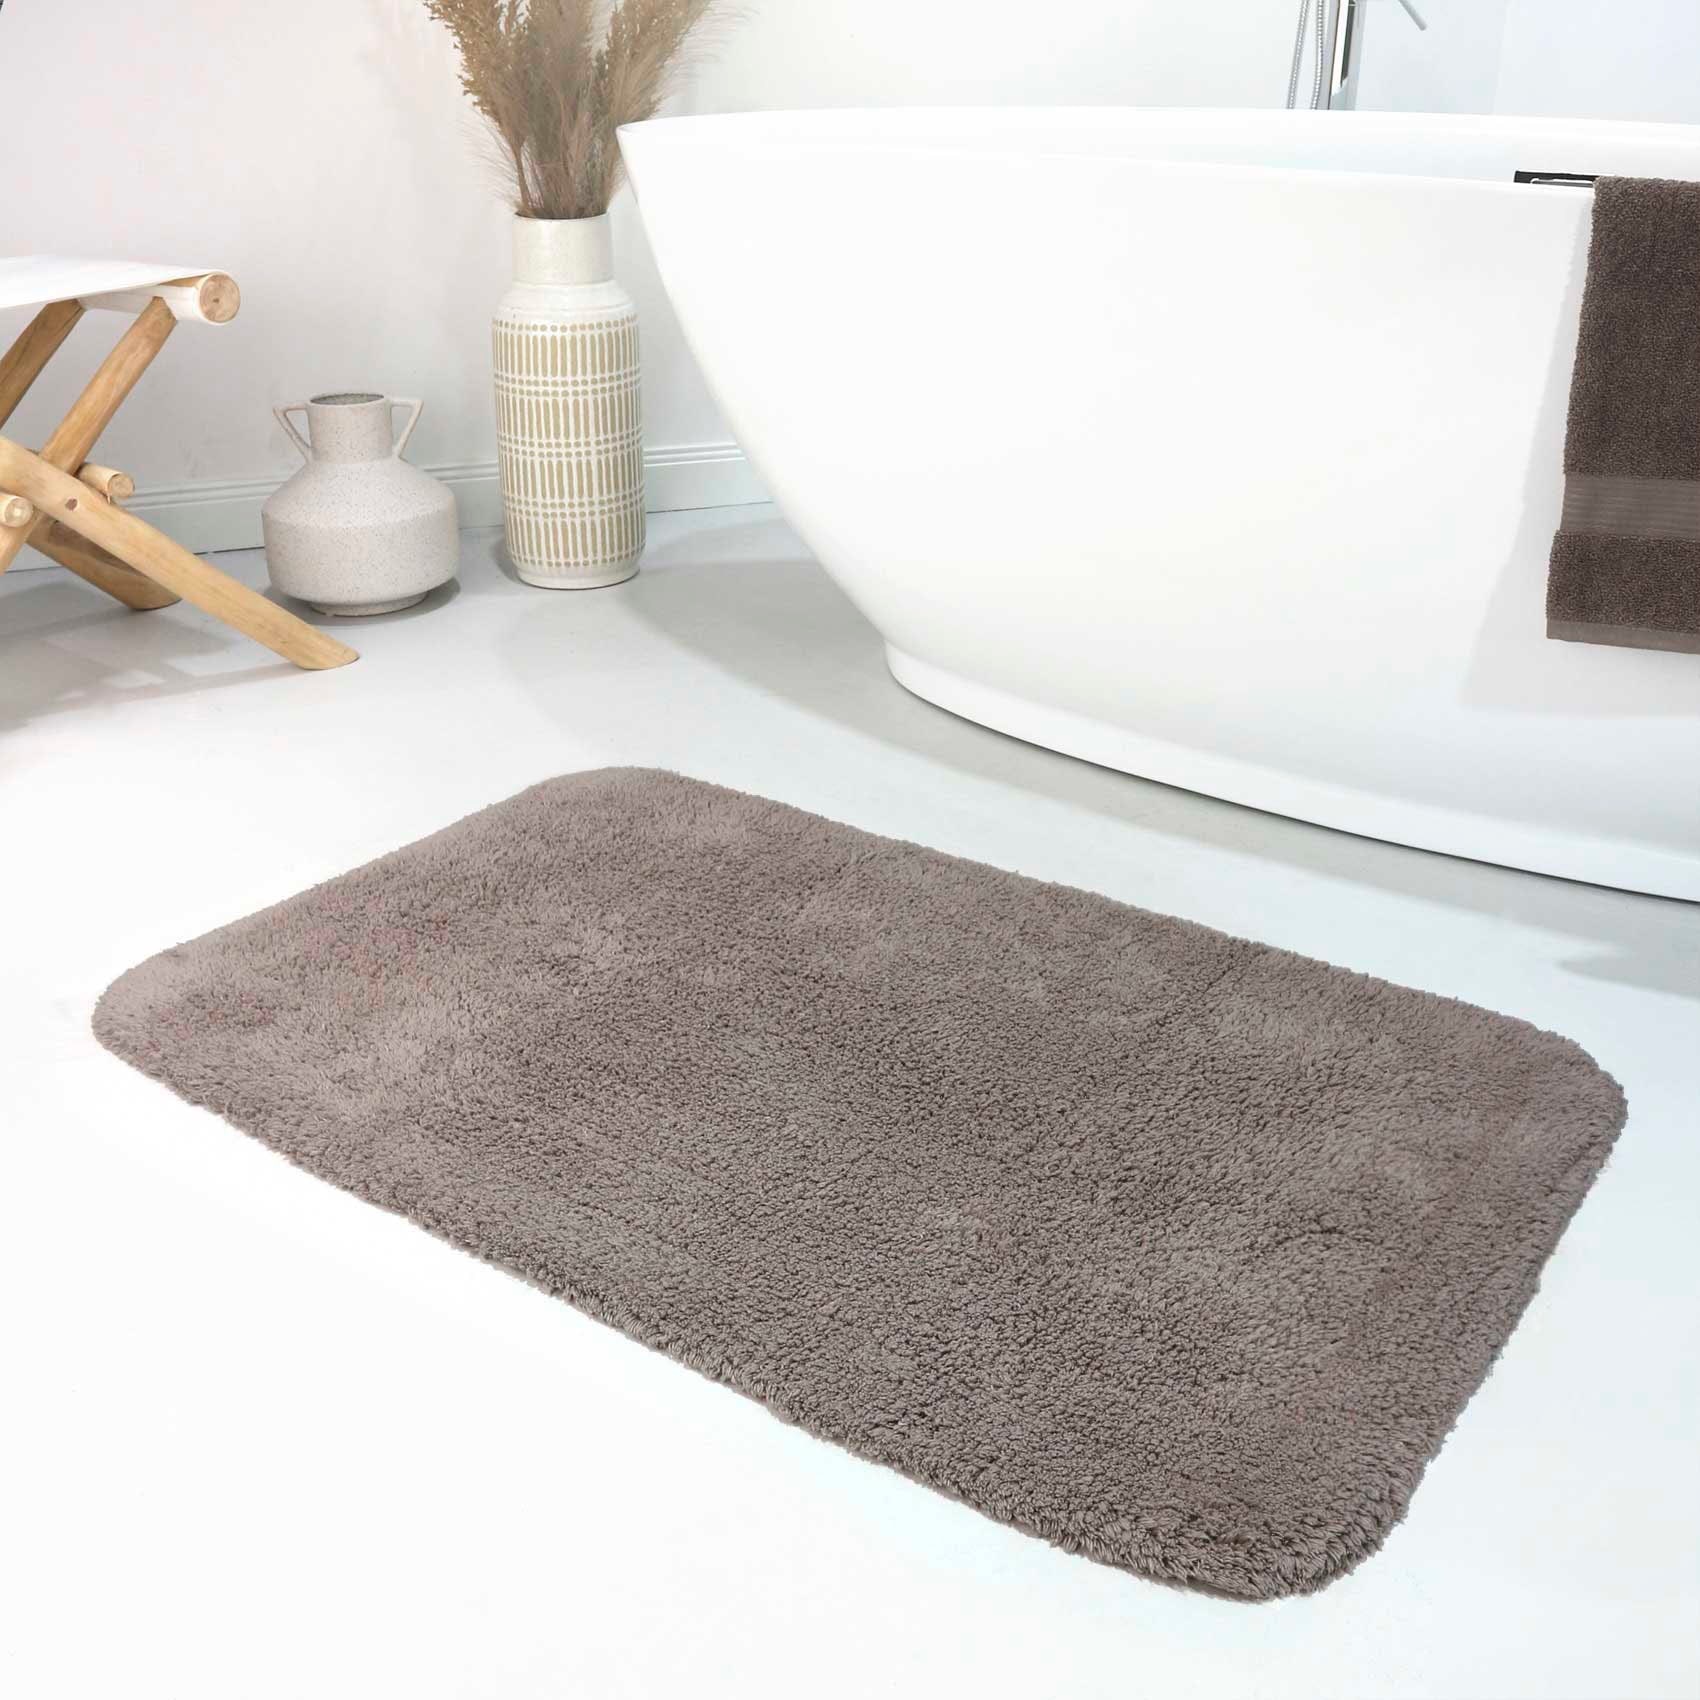 Wecon home Basics Badematte »Ole WB-2721«, Höhe 20 mm, fußbodenheizungsgeeignet Wecon home Basics taupe